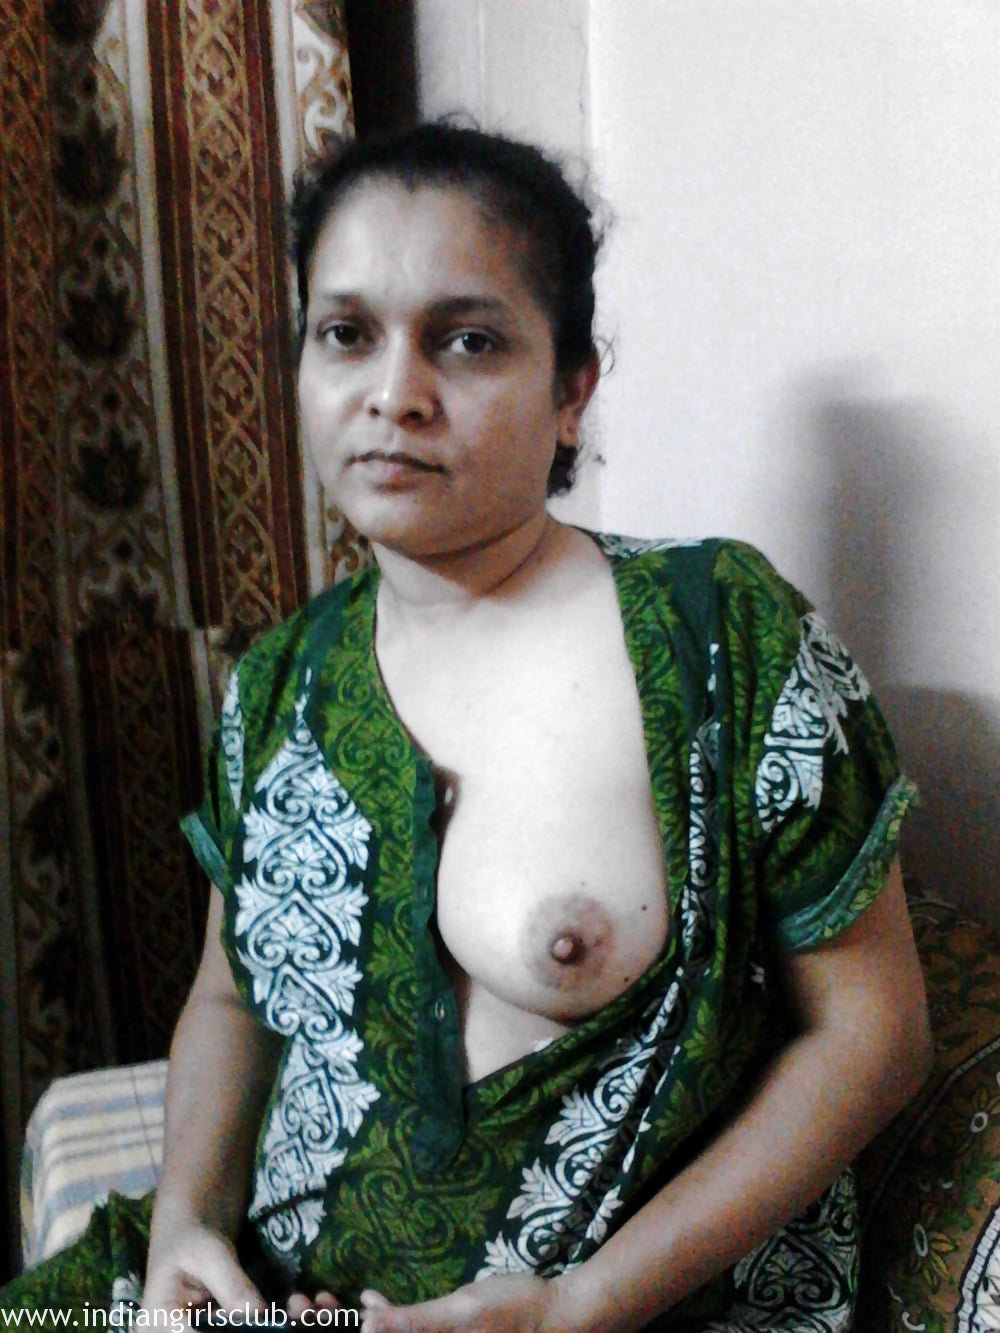 Tamil Juicy Boobs - amateur-indian-aunty-showing-big-juicy-boobs-17 - Indian Girls Club - Nude  Indian Girls & Hot Sexy Indian Babes